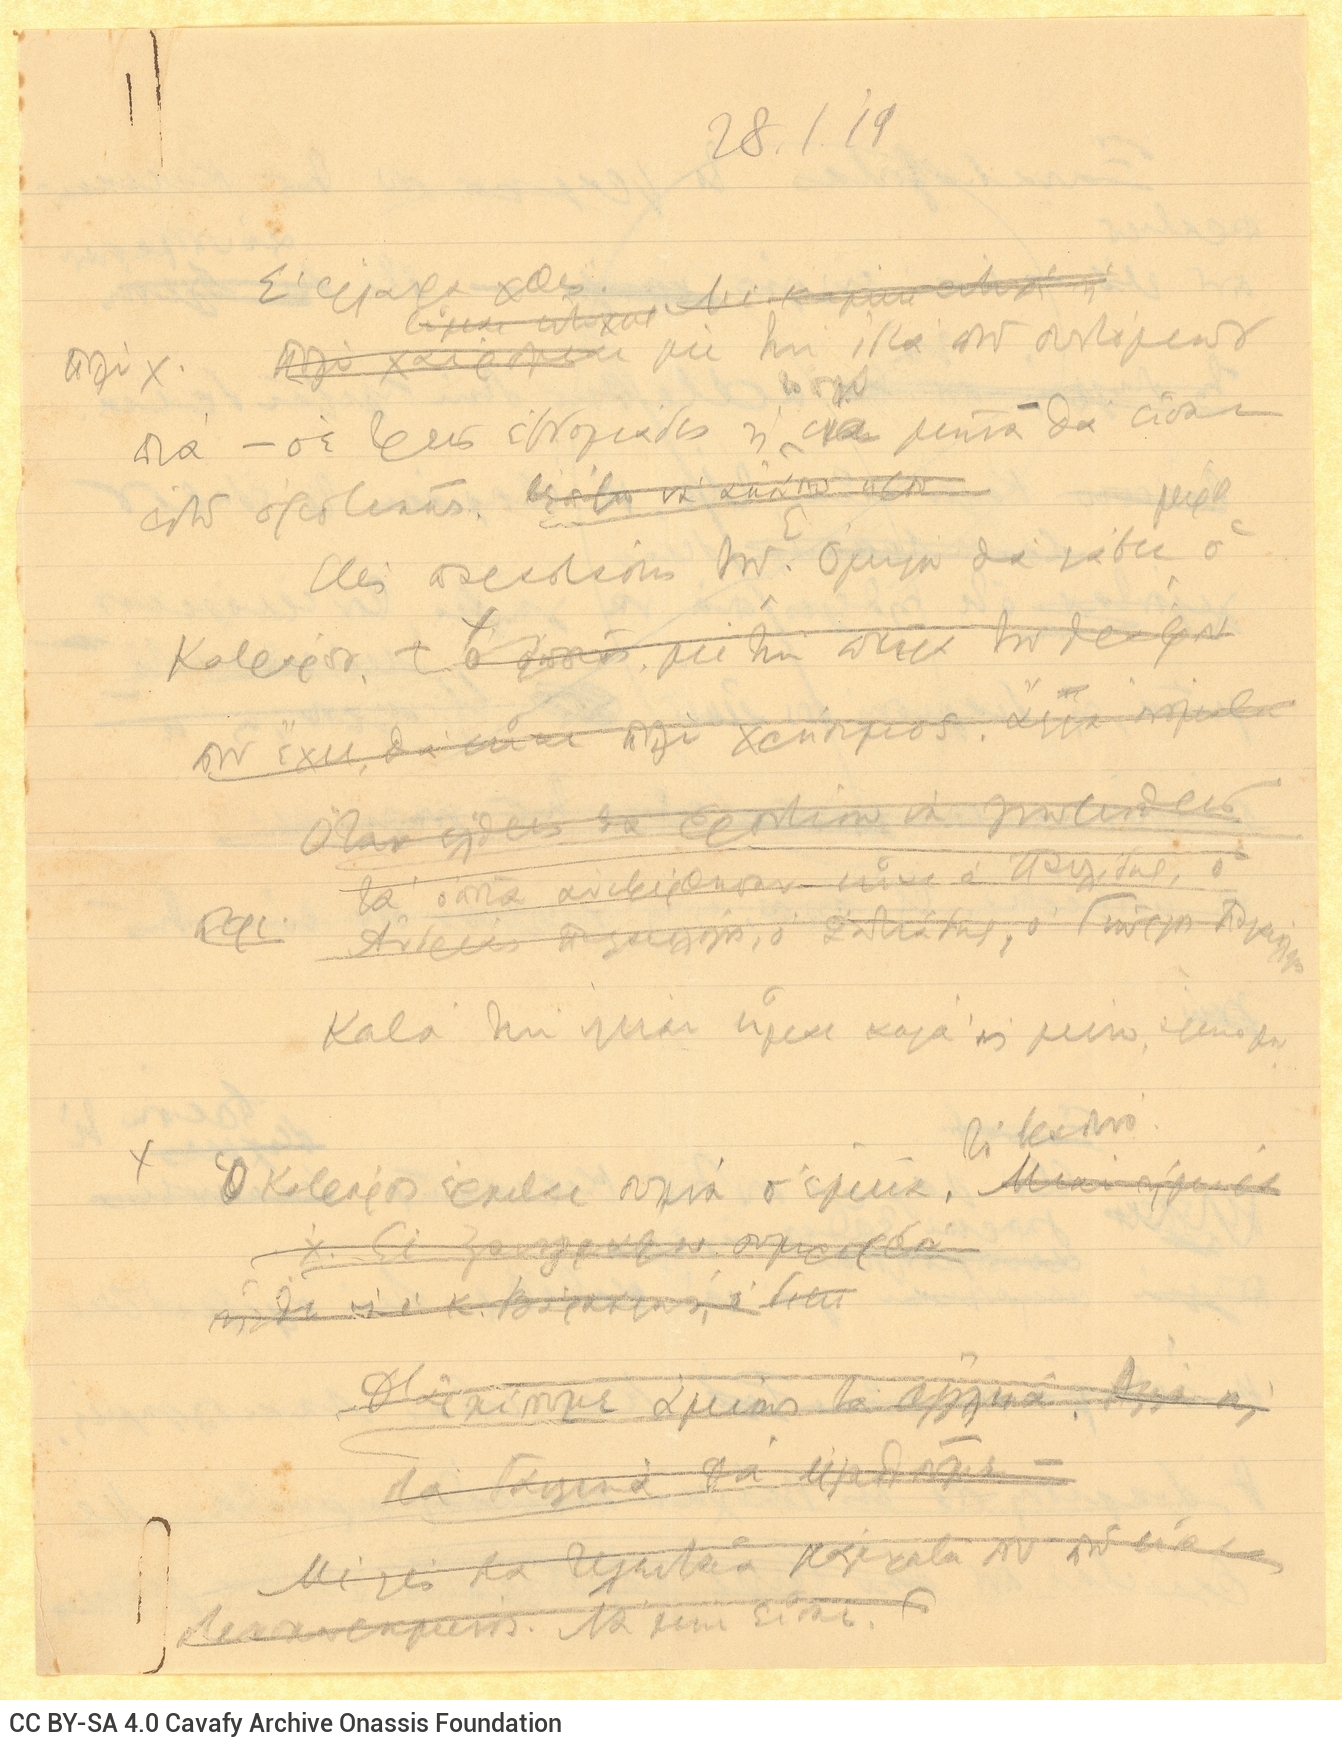 Handwritten draft letter by Cavafy to Alekos [Singopoulo] on two ruled sheets. The verso of the second sheet is blank. The po